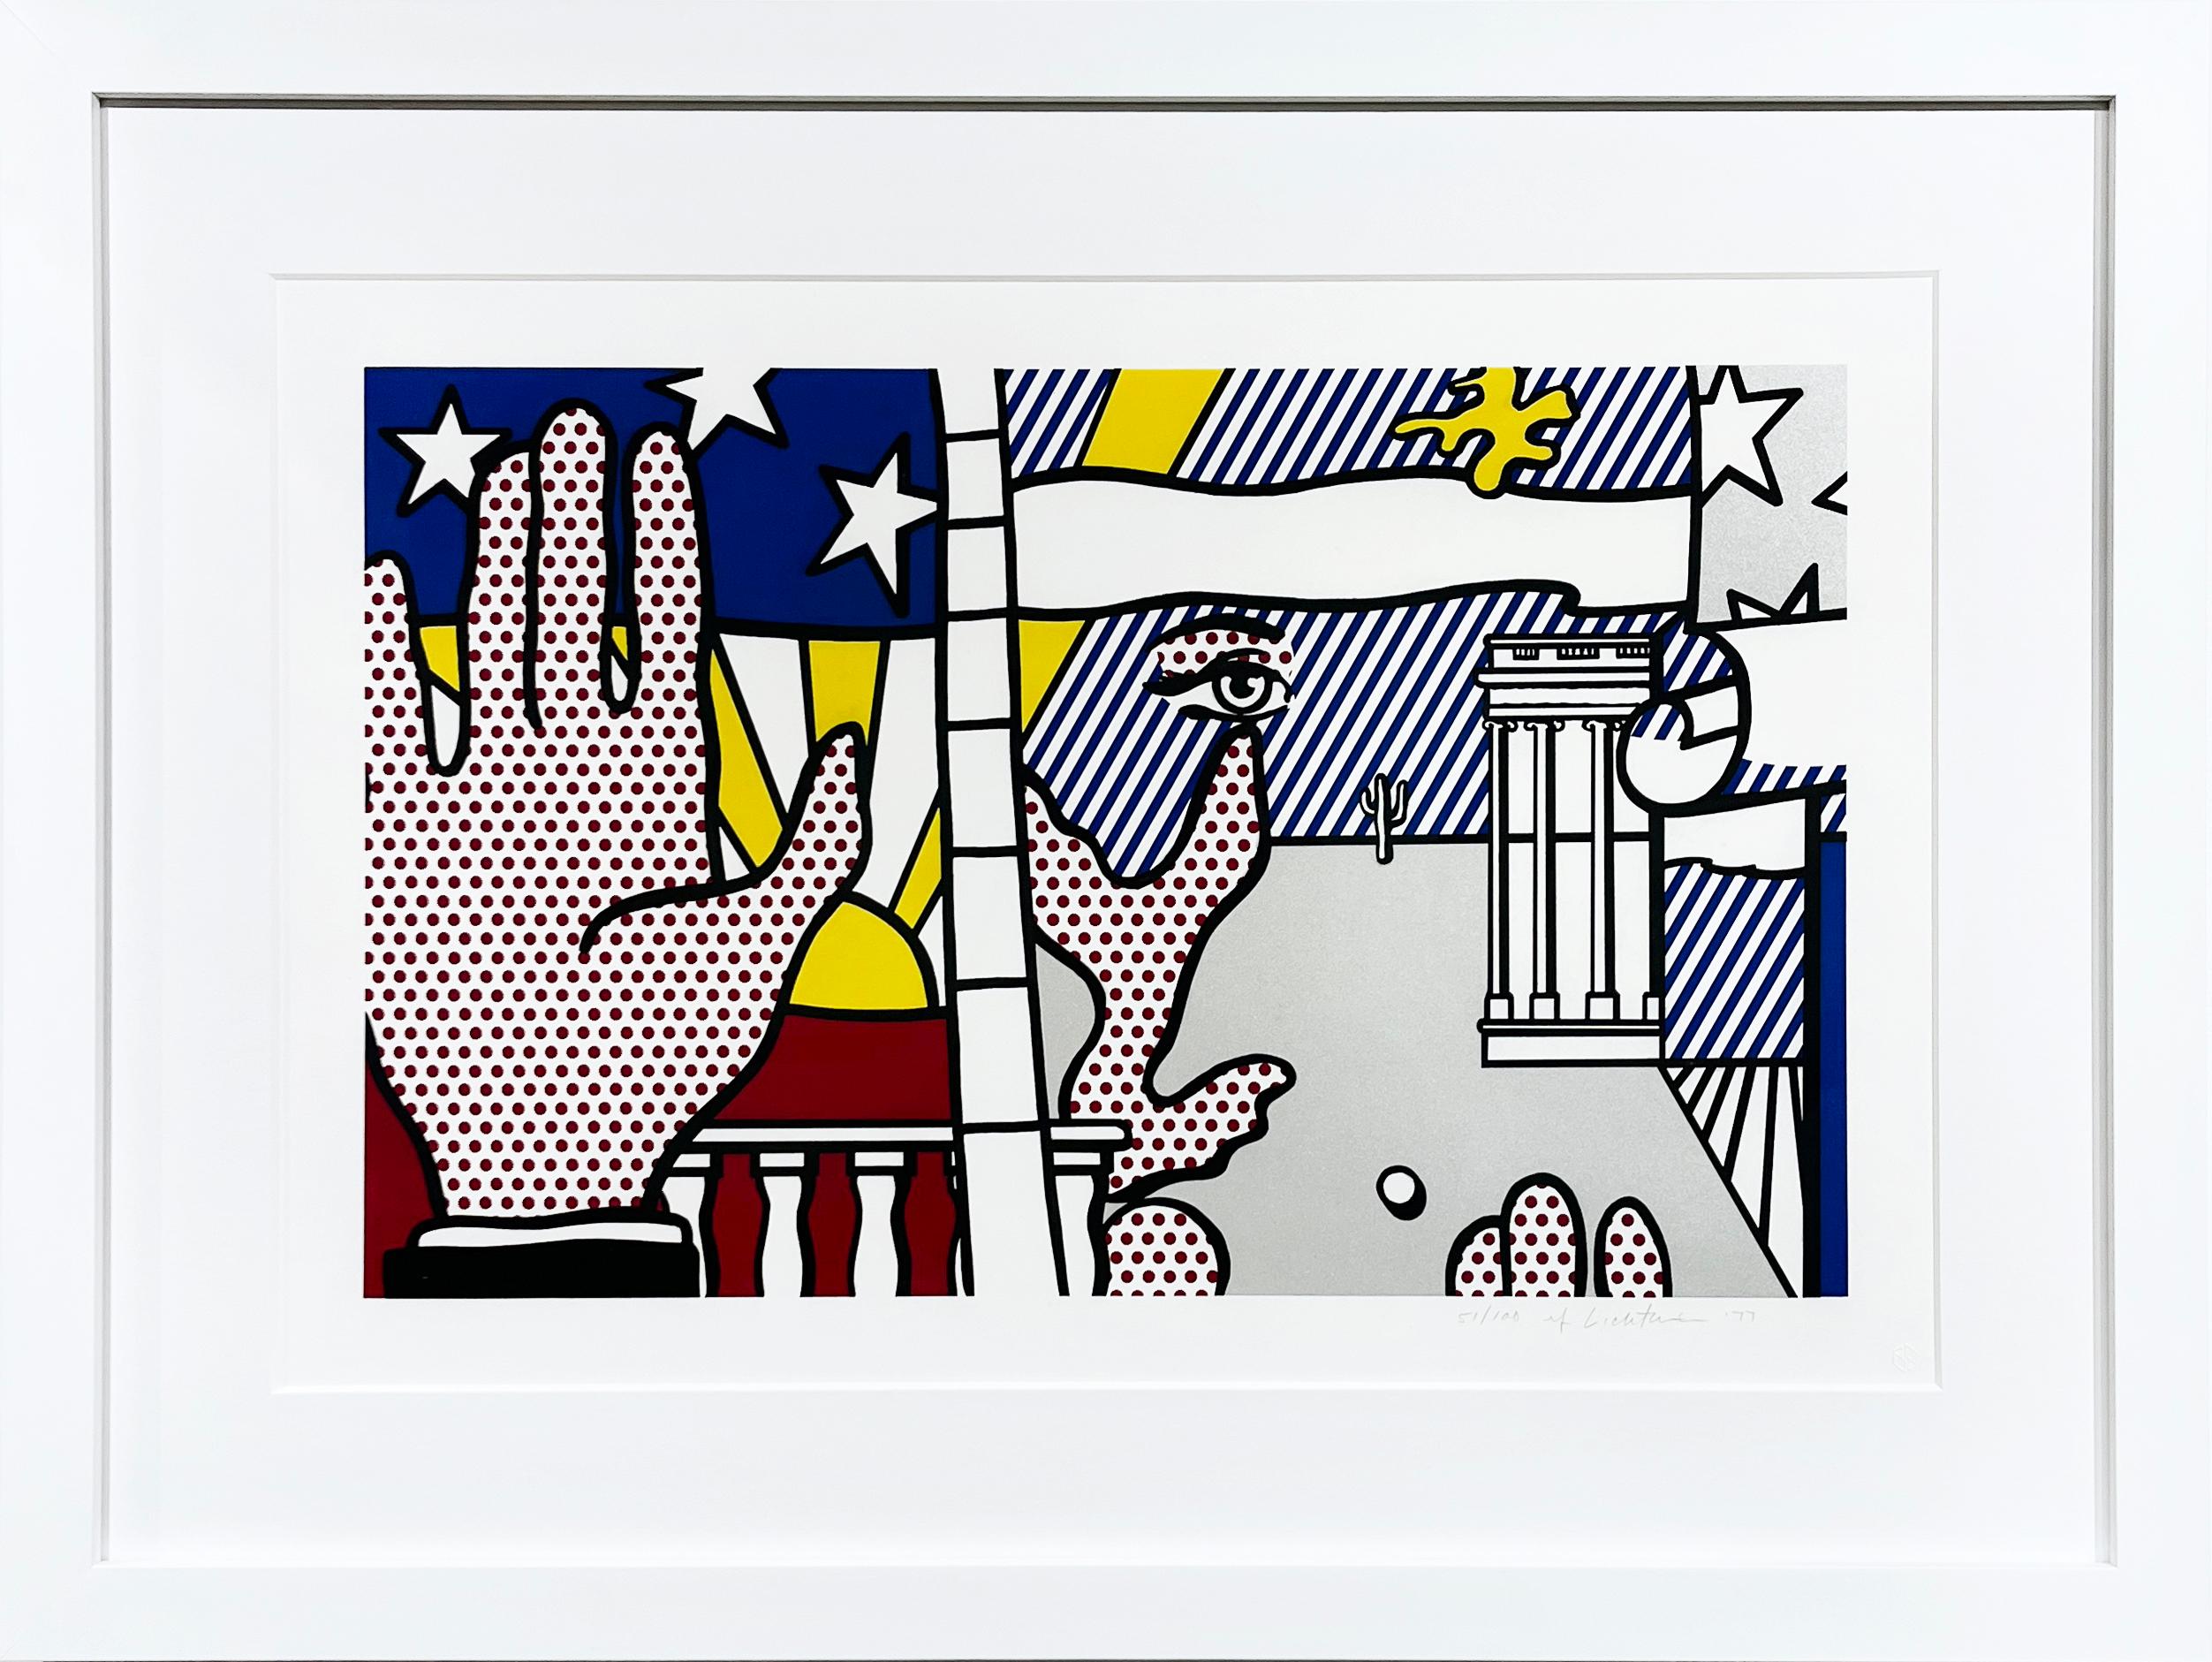 Artist:  Lichtenstein, Roy
Title:  Inaugural Print
Date:  1977
Medium:  Screenprint in colors on Arches 88 Paper
Unframed Dimensions:  20" x 30"
Framed Dimensions:  25.25" x 35"
Signature:  Pencil signed
Edition:  51/100
Literature:  Corlett